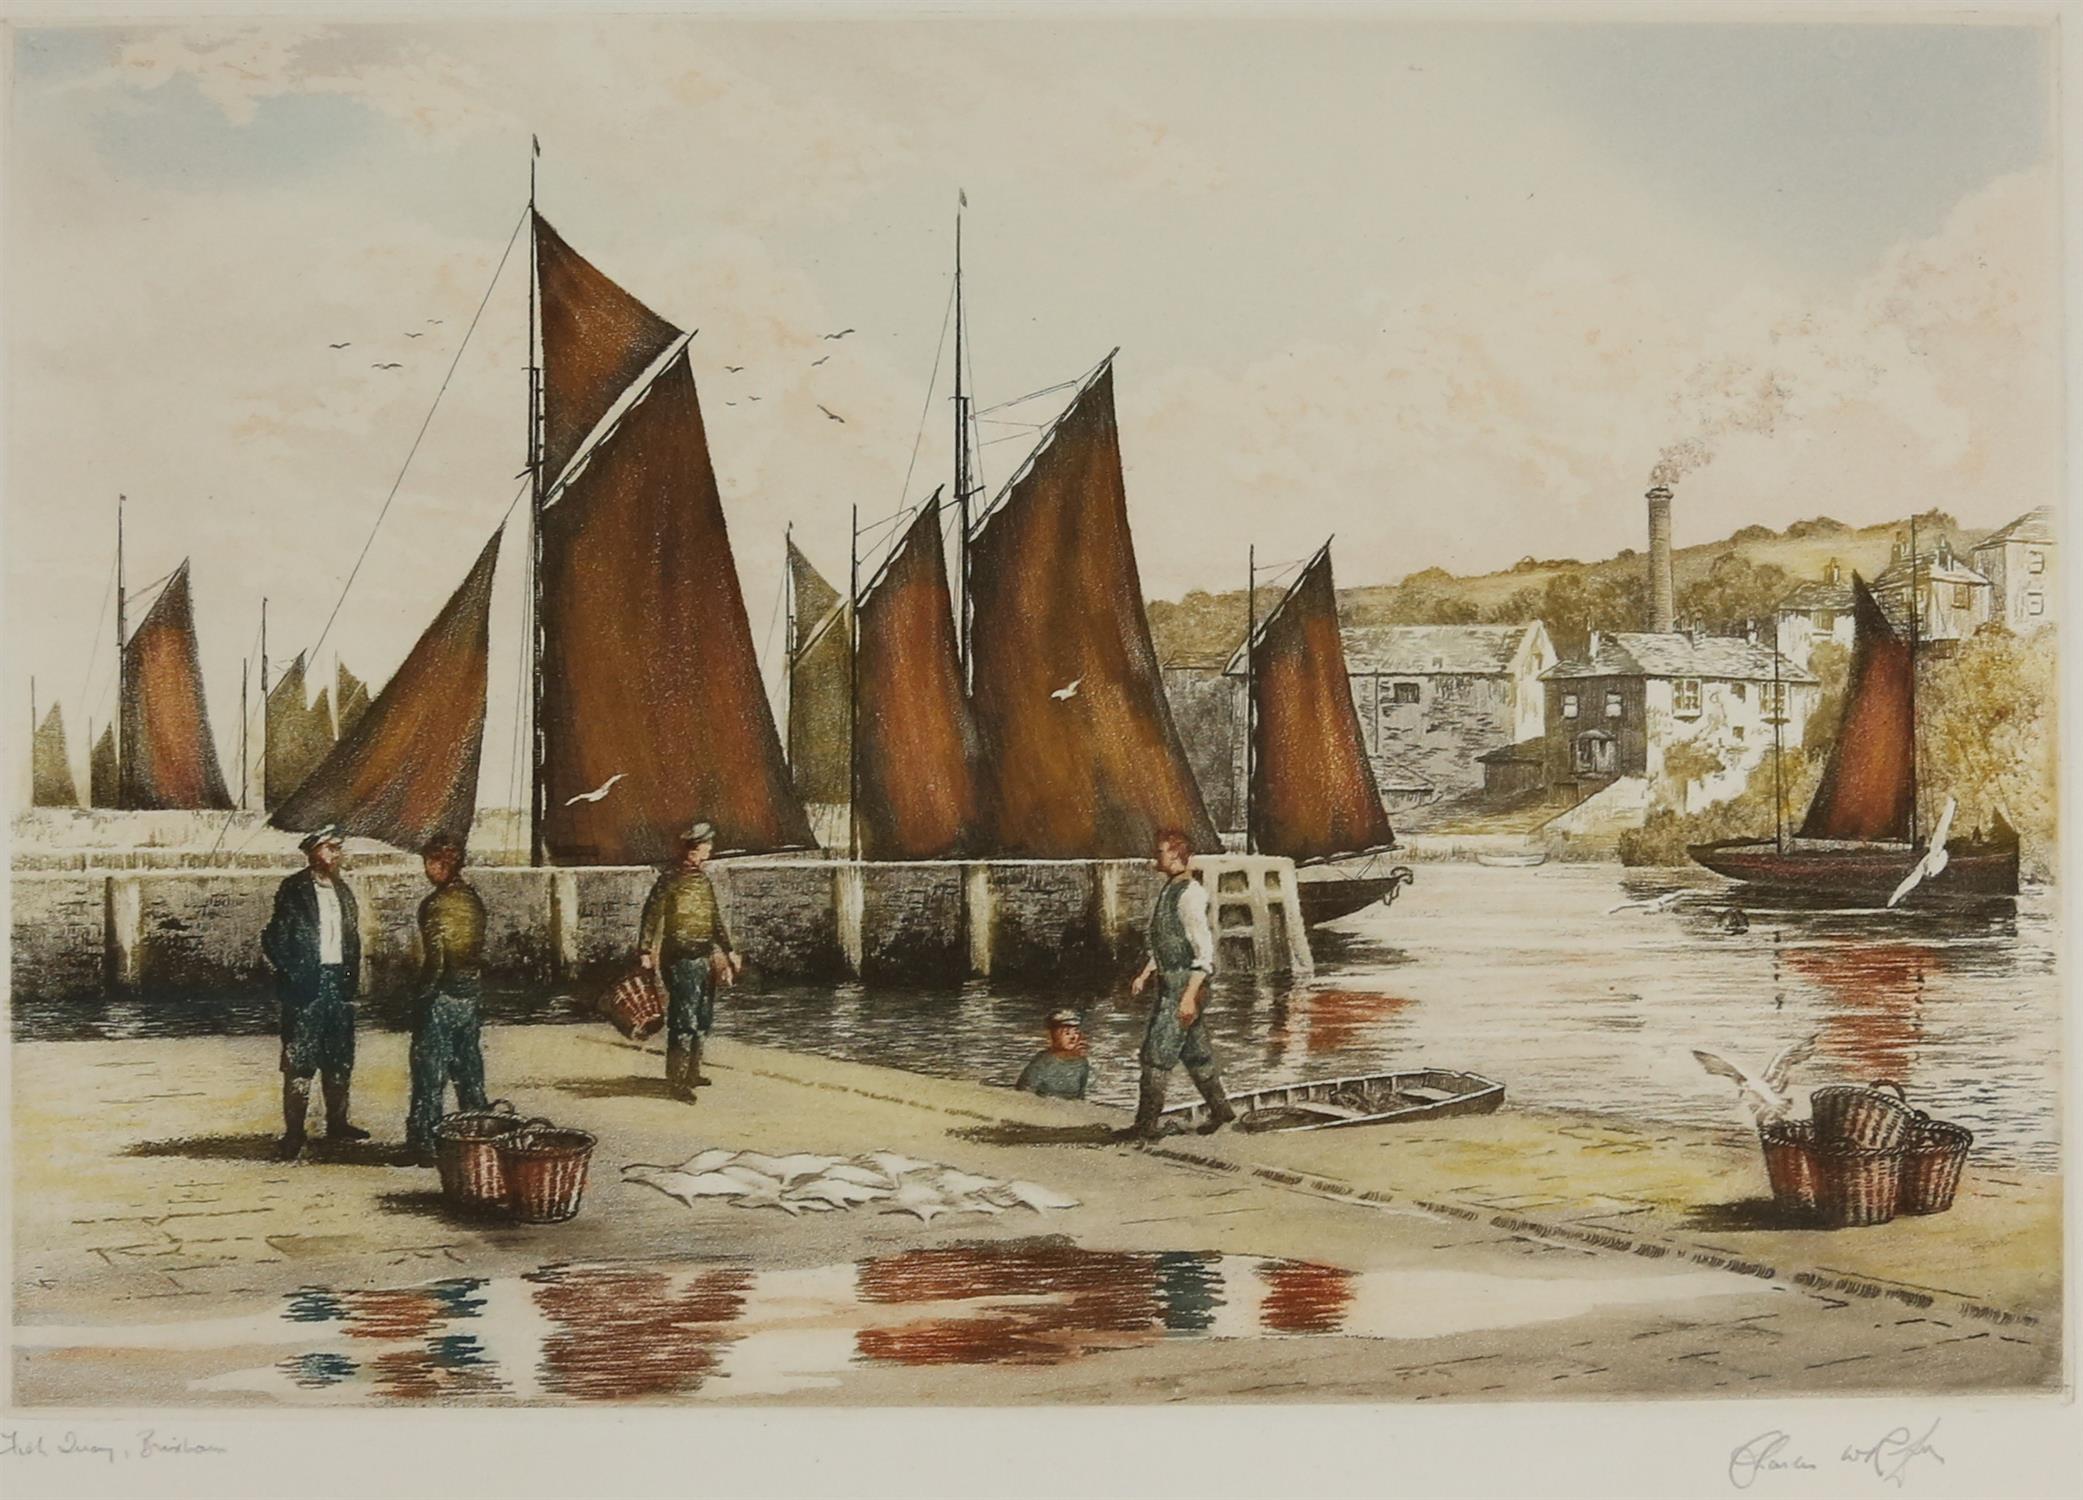 Charles Riley 'Brixham boats' etching printed in colour, signed indistinctly and titled in pencil. - Image 2 of 6